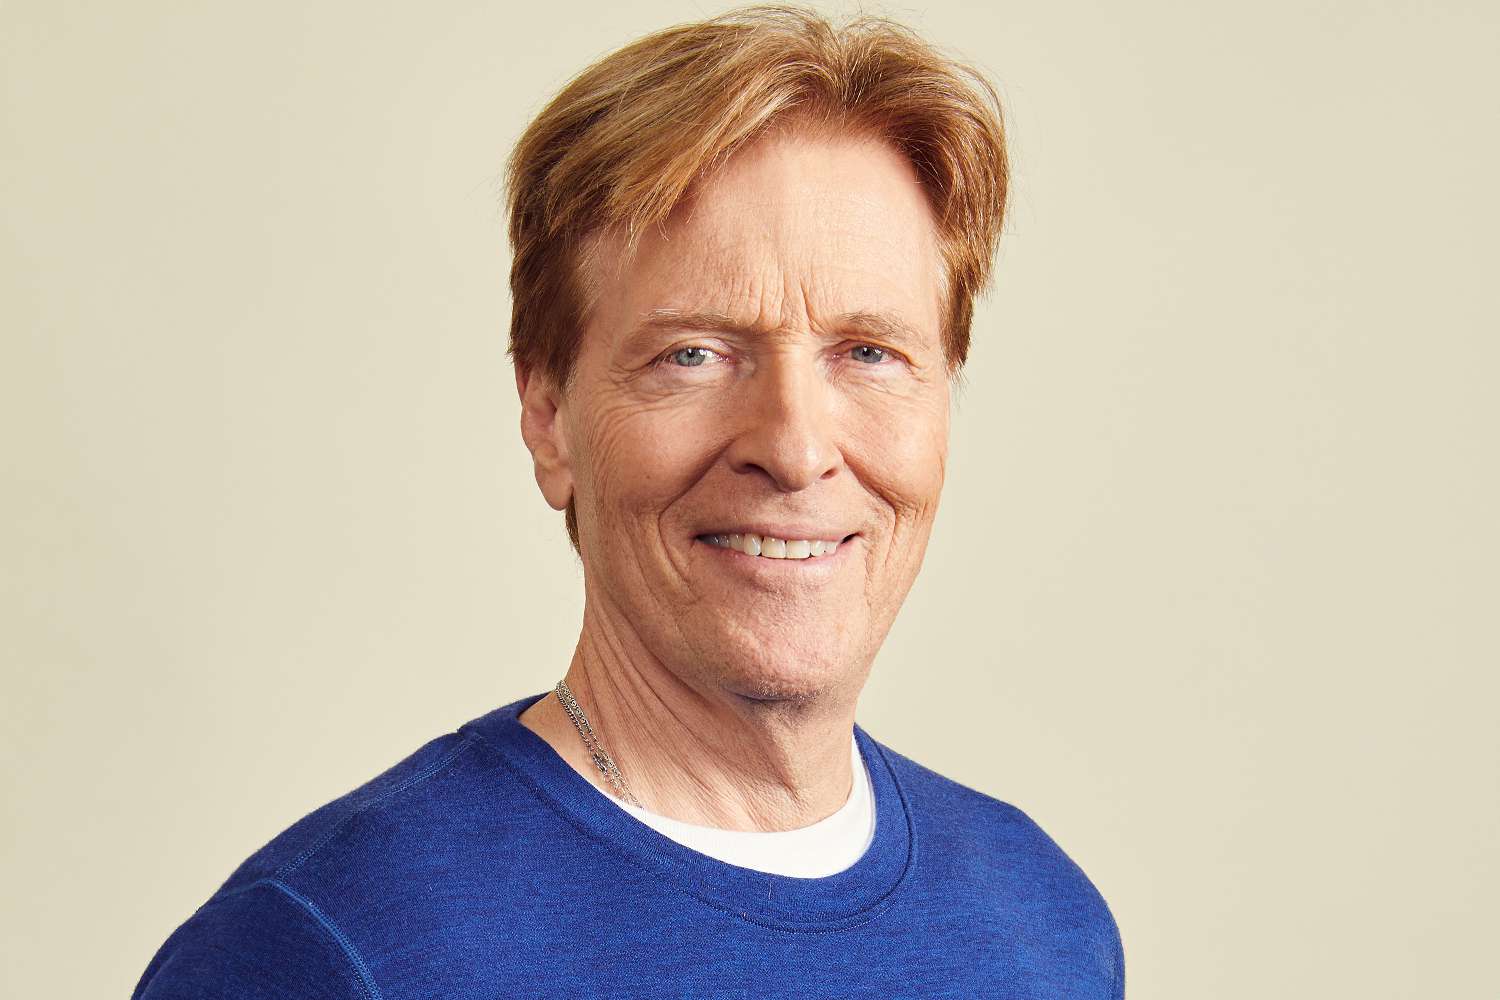 Jack Wagner attends Christmas Con New Jersey 2022 at Expo Center on December 10, 2022 in Edison, New Jersey.